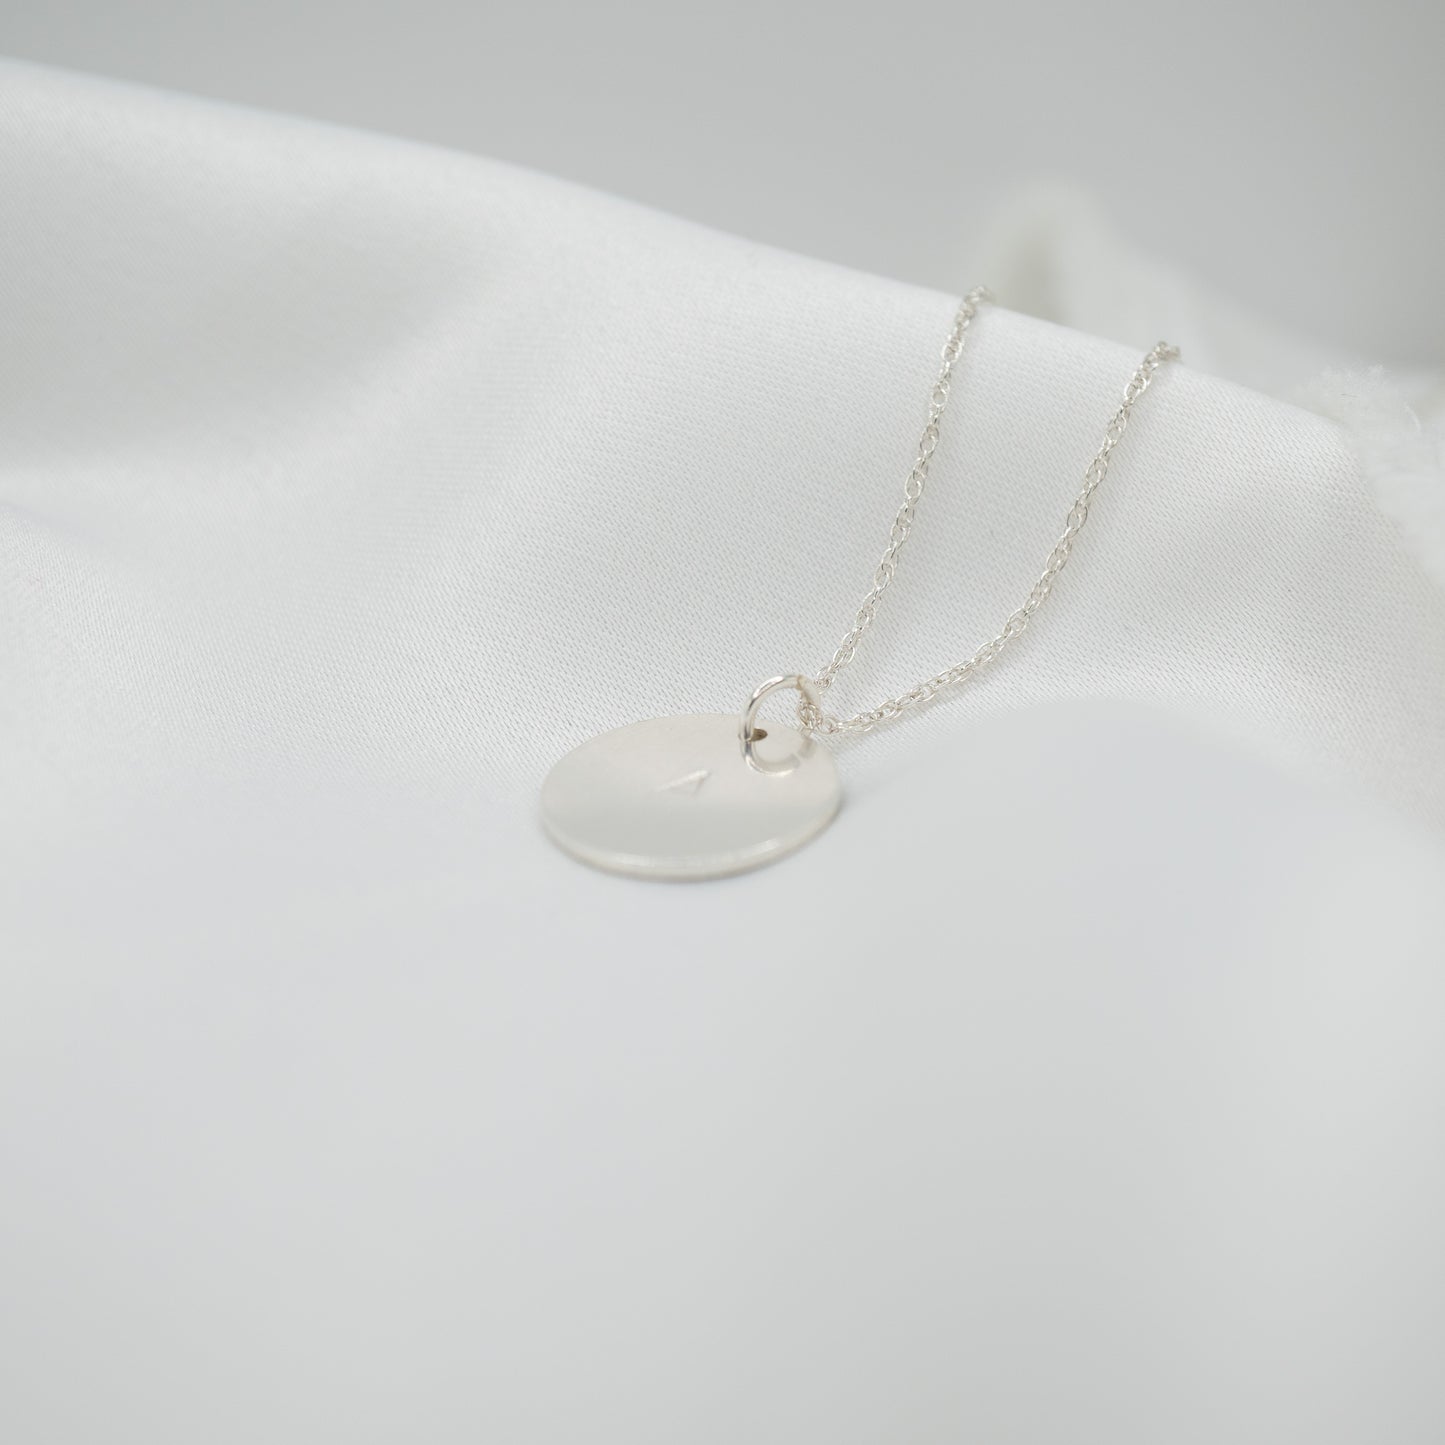 Sterling Silver Hand Stamped Round Pendant and Necklace - shot on white - side left